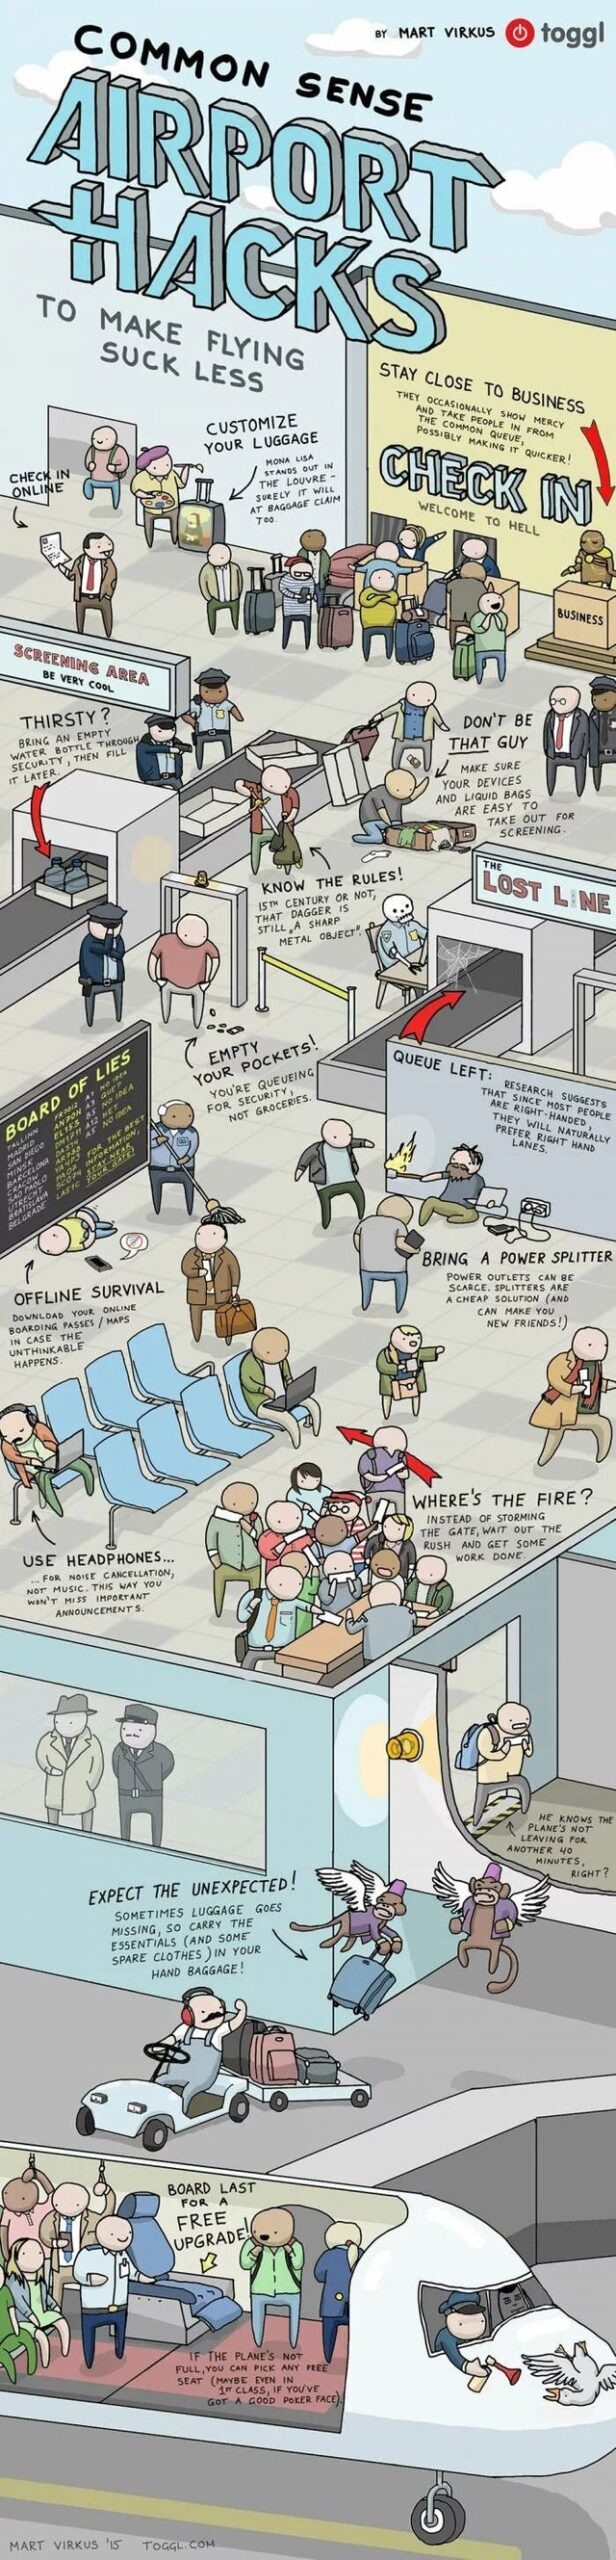 airport hacks - Bet Common Sense By Mart Virkus toggl Arport Hacks To Make Flying Suck Less Stay Close To Business They Occasionally Show Mercy And Take People In From The Common Queve, Possibly Making It Quicker! Customize Your Luggage Mona Lisa Stands O